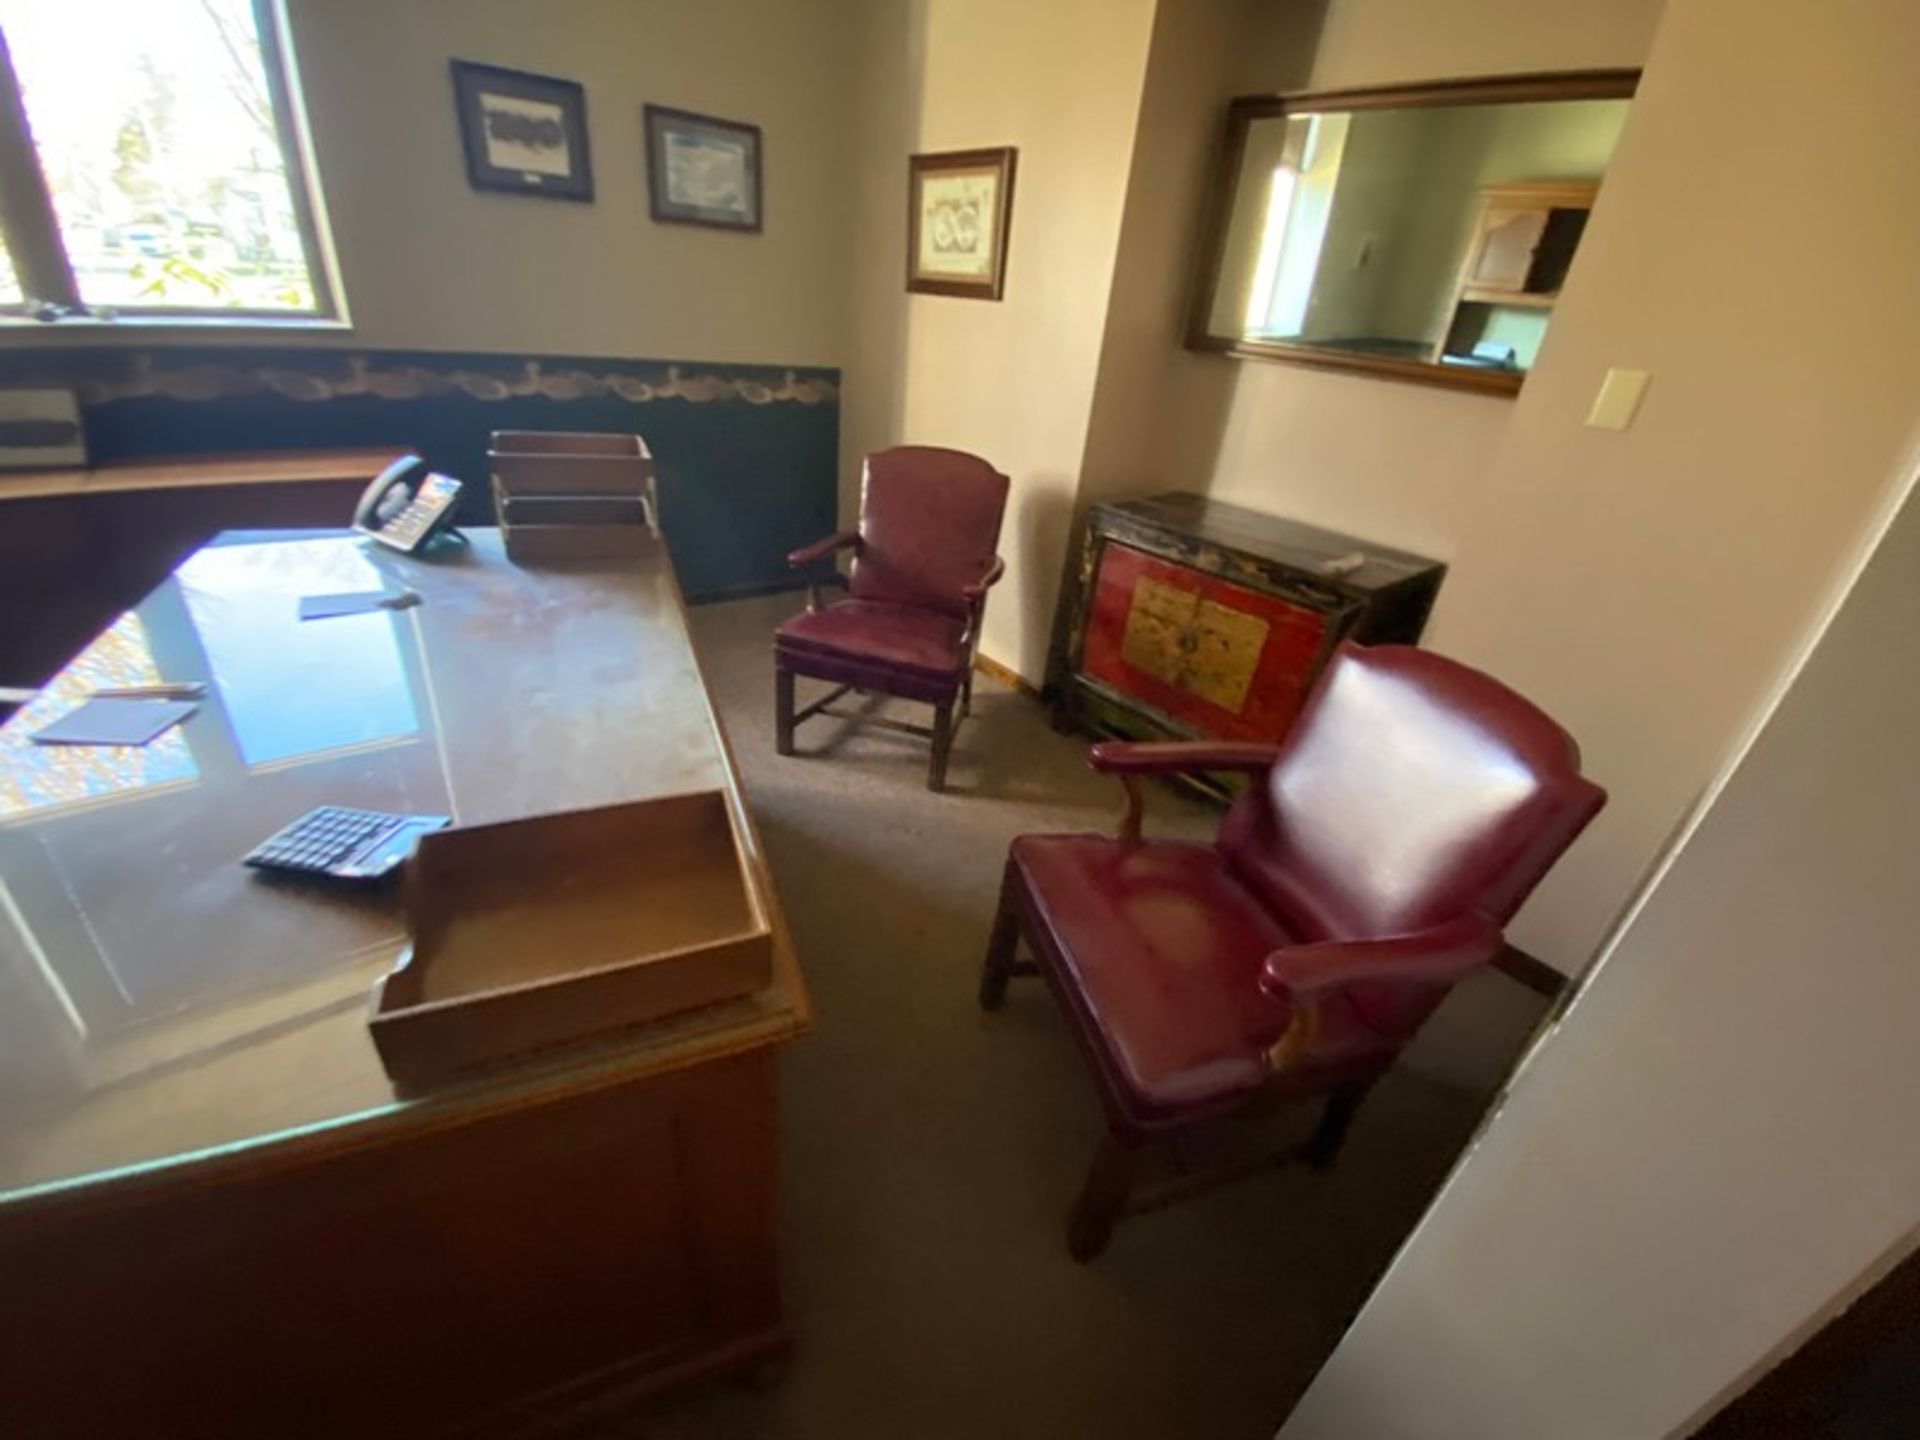 CONTENTS OF EXECUTIVE OFFICE, INCLUDES FURNITURE & CHAIRS (LOCATED IN CALLERY, PA) - Image 2 of 3